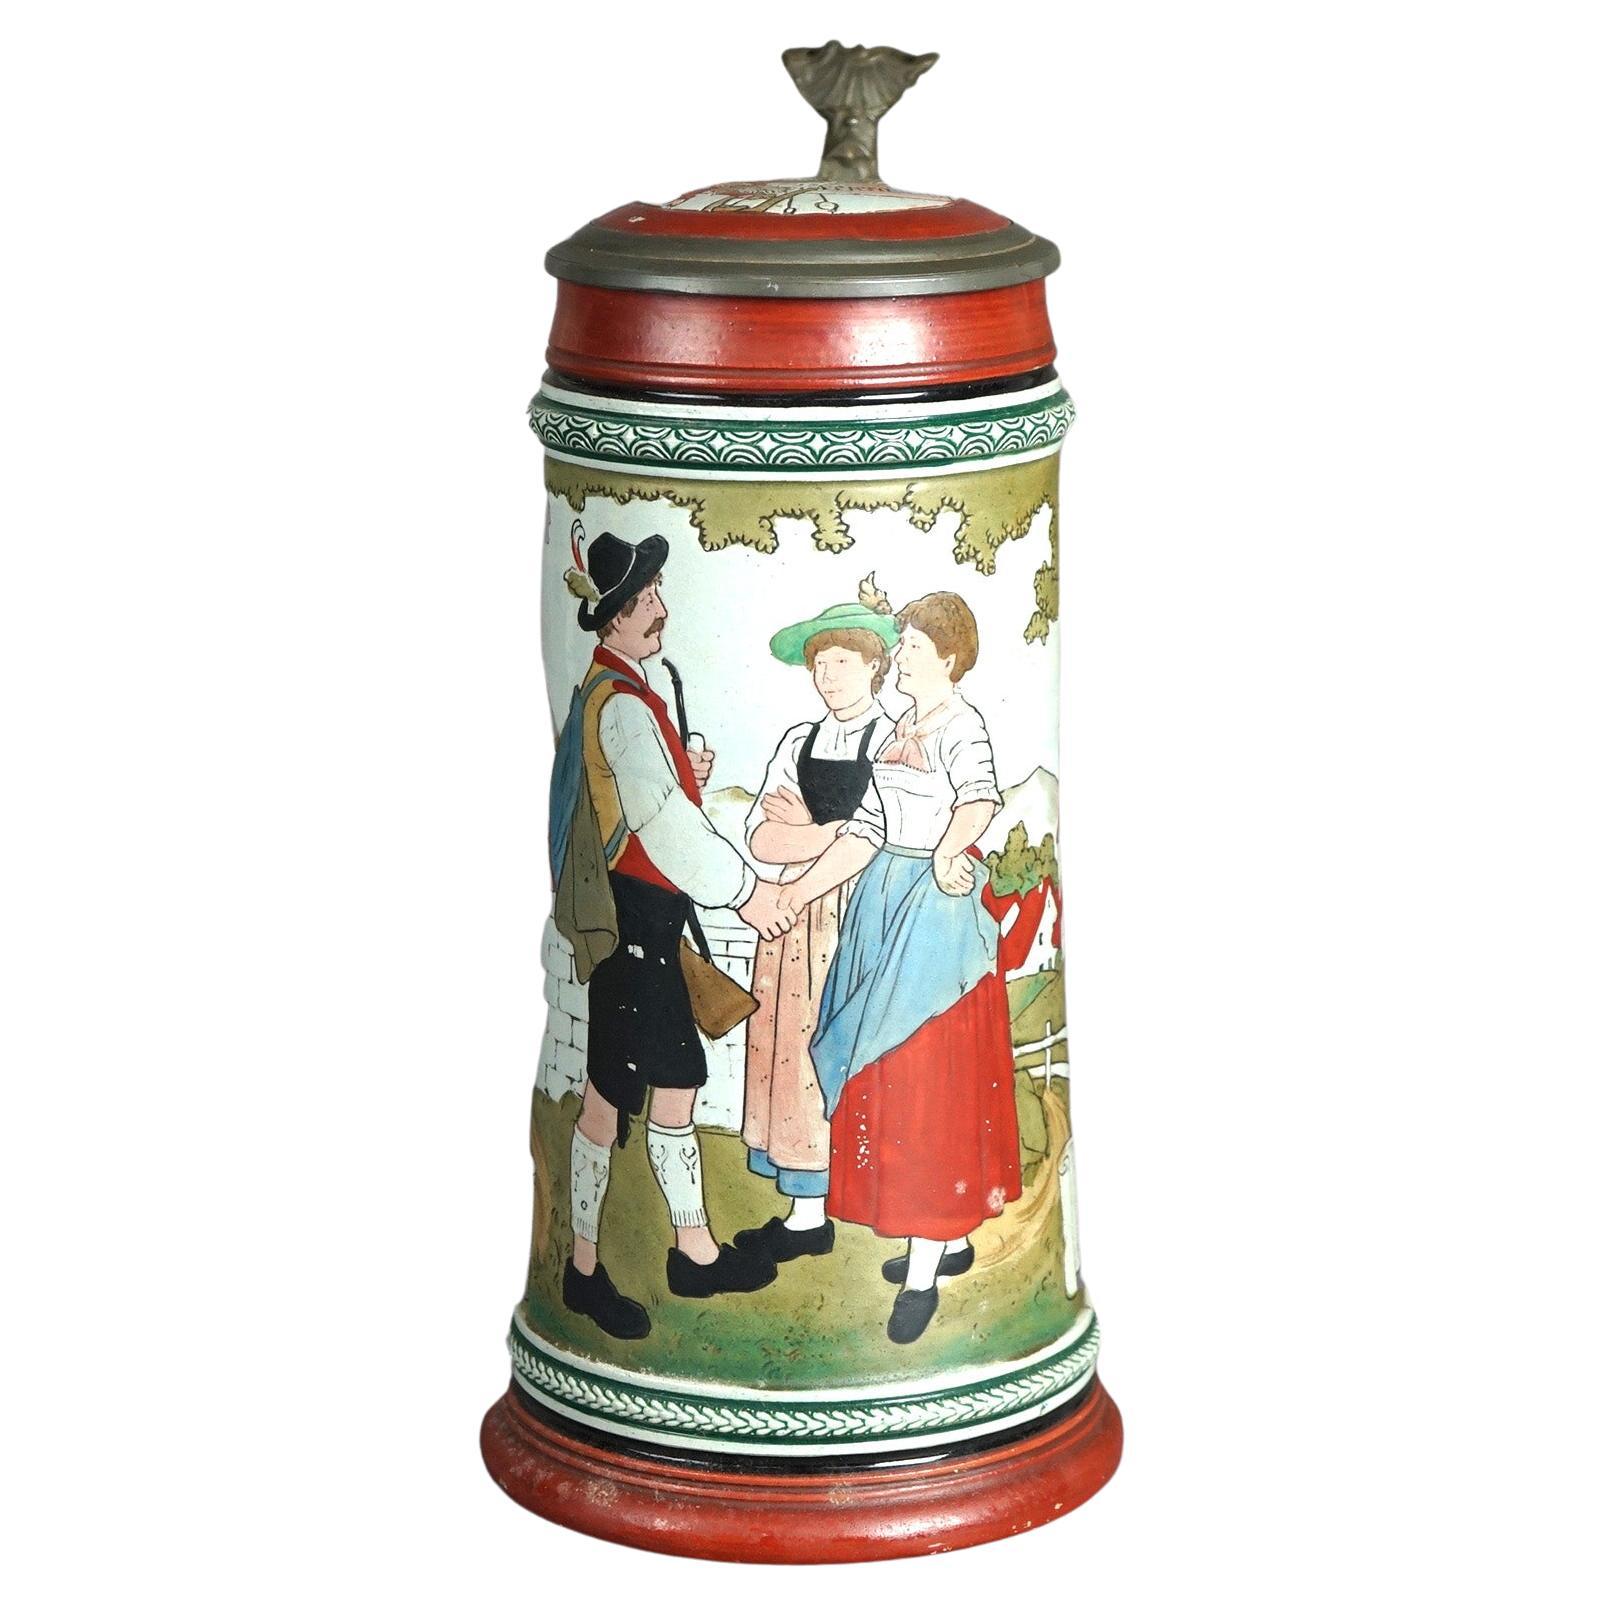 Antique Art & Crafts Scenic Musterschutz Germany Pottery Stein Circa 1900 For Sale